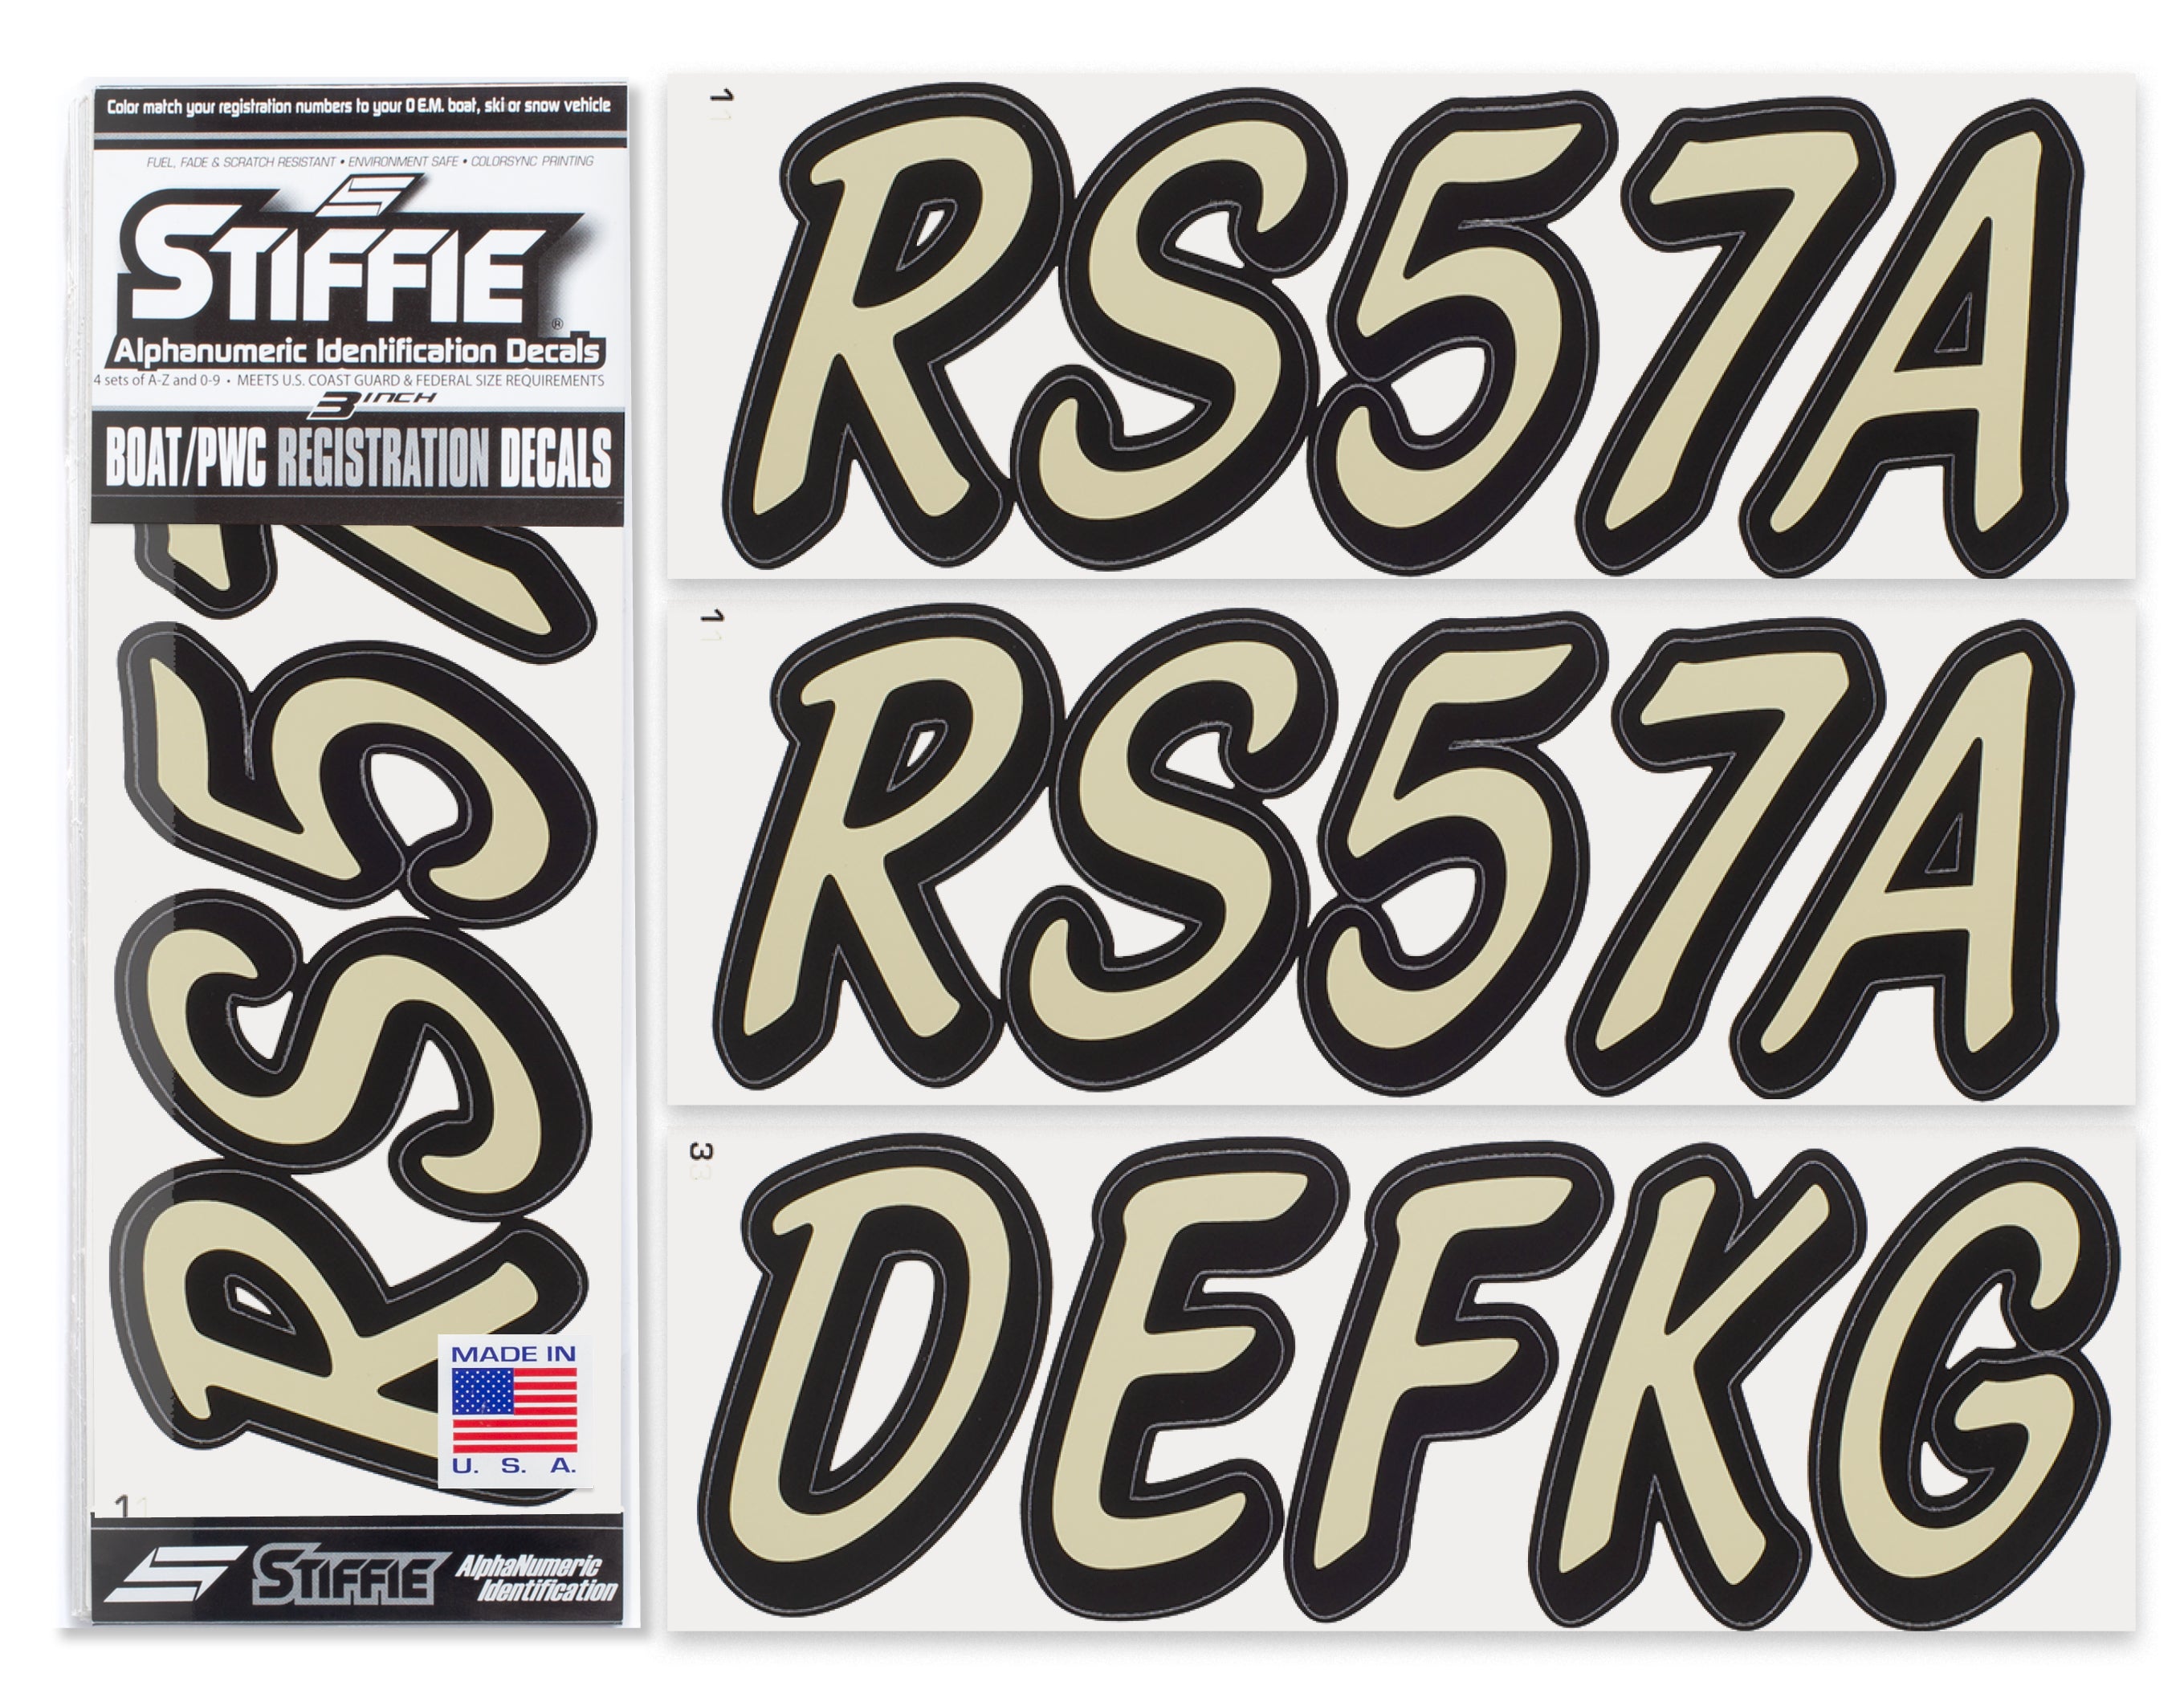 STIFFIE Whipline Solid Sand/Black 3" Alpha-Numeric Registration Identification Numbers Stickers Decals for Boats & Personal Watercraft